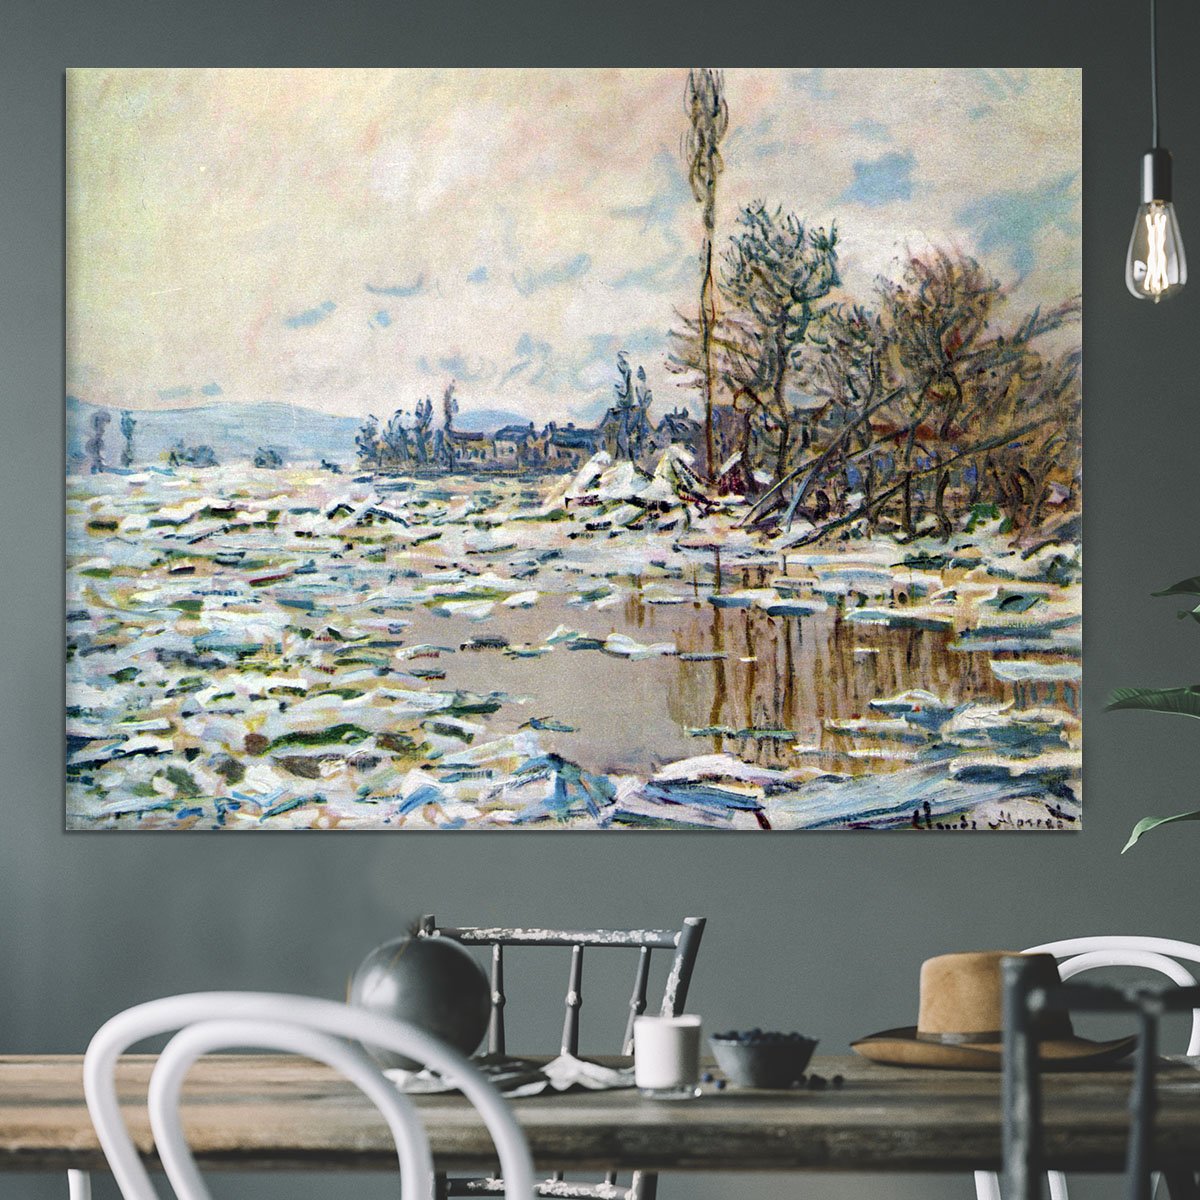 Break Up of Ice by Monet Canvas Print or Poster